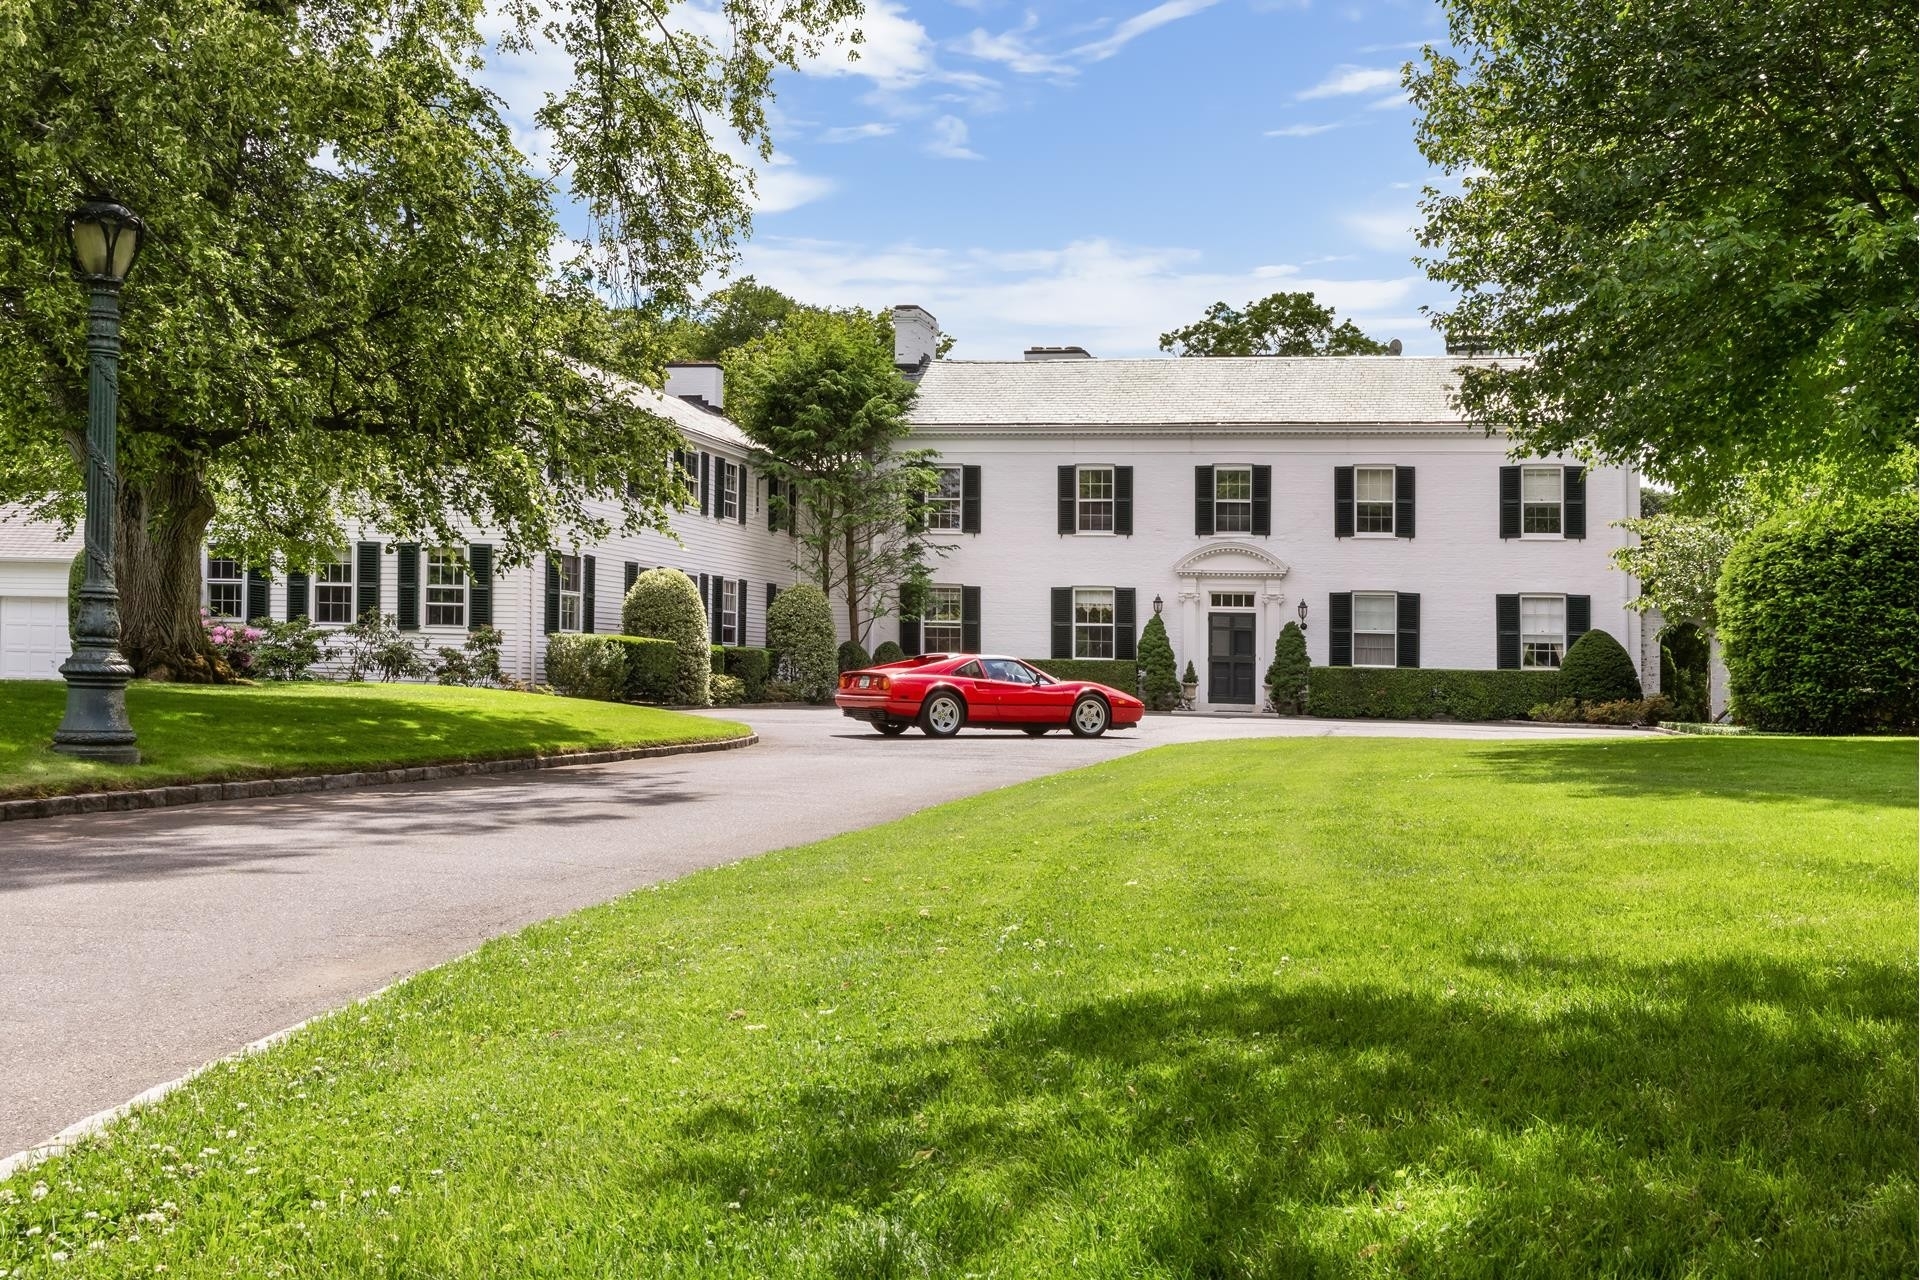 Single Family Home for Sale at Lattingtown, Locust Valley, New York 11560